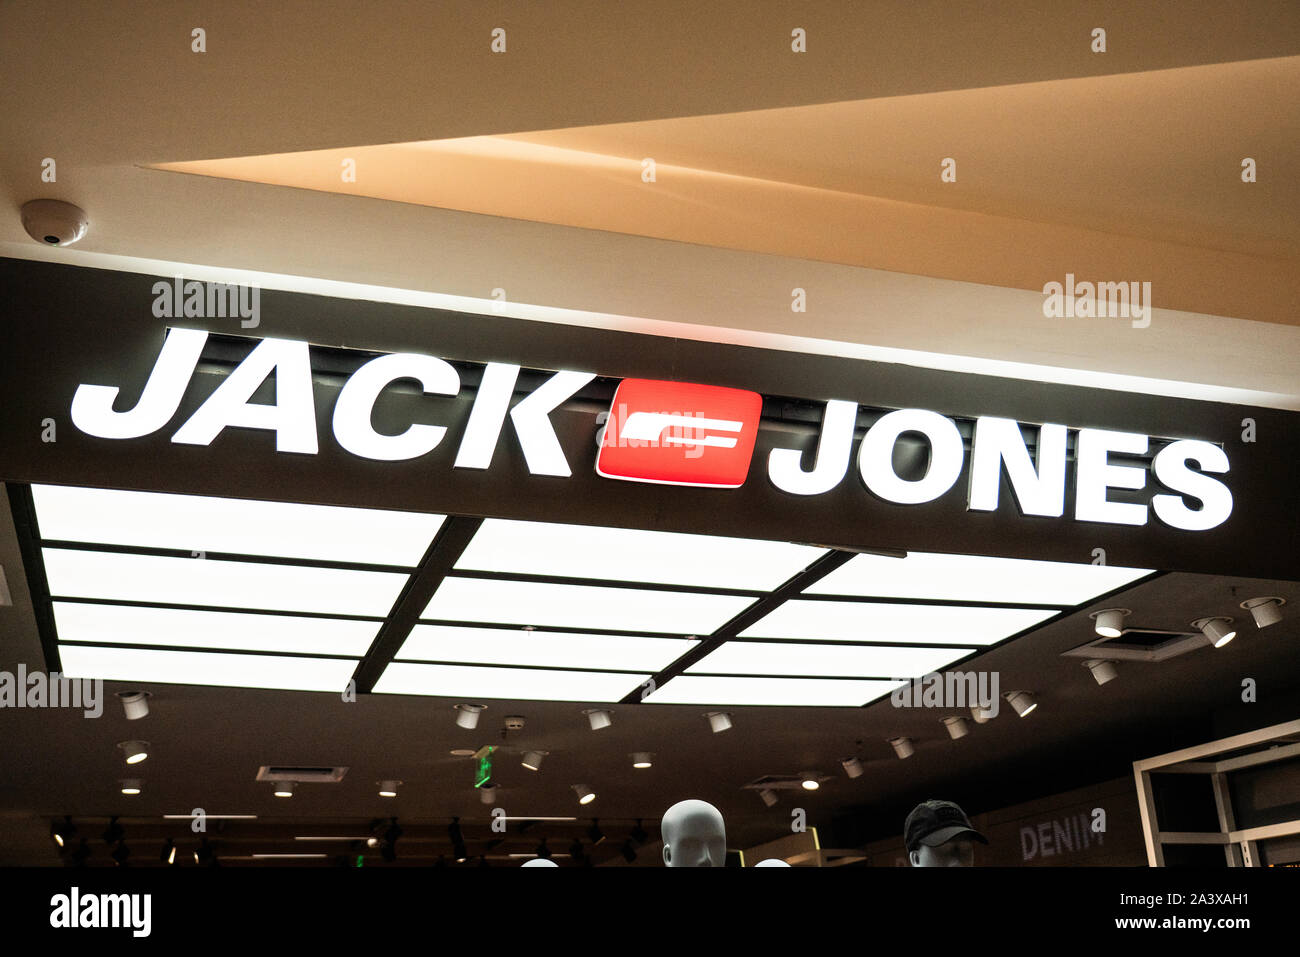 Logo of Jack & Jones, a menswear brand owned by Denmark clothing company  Bestseller A/S, seen in Shenzhen Stock Photo - Alamy